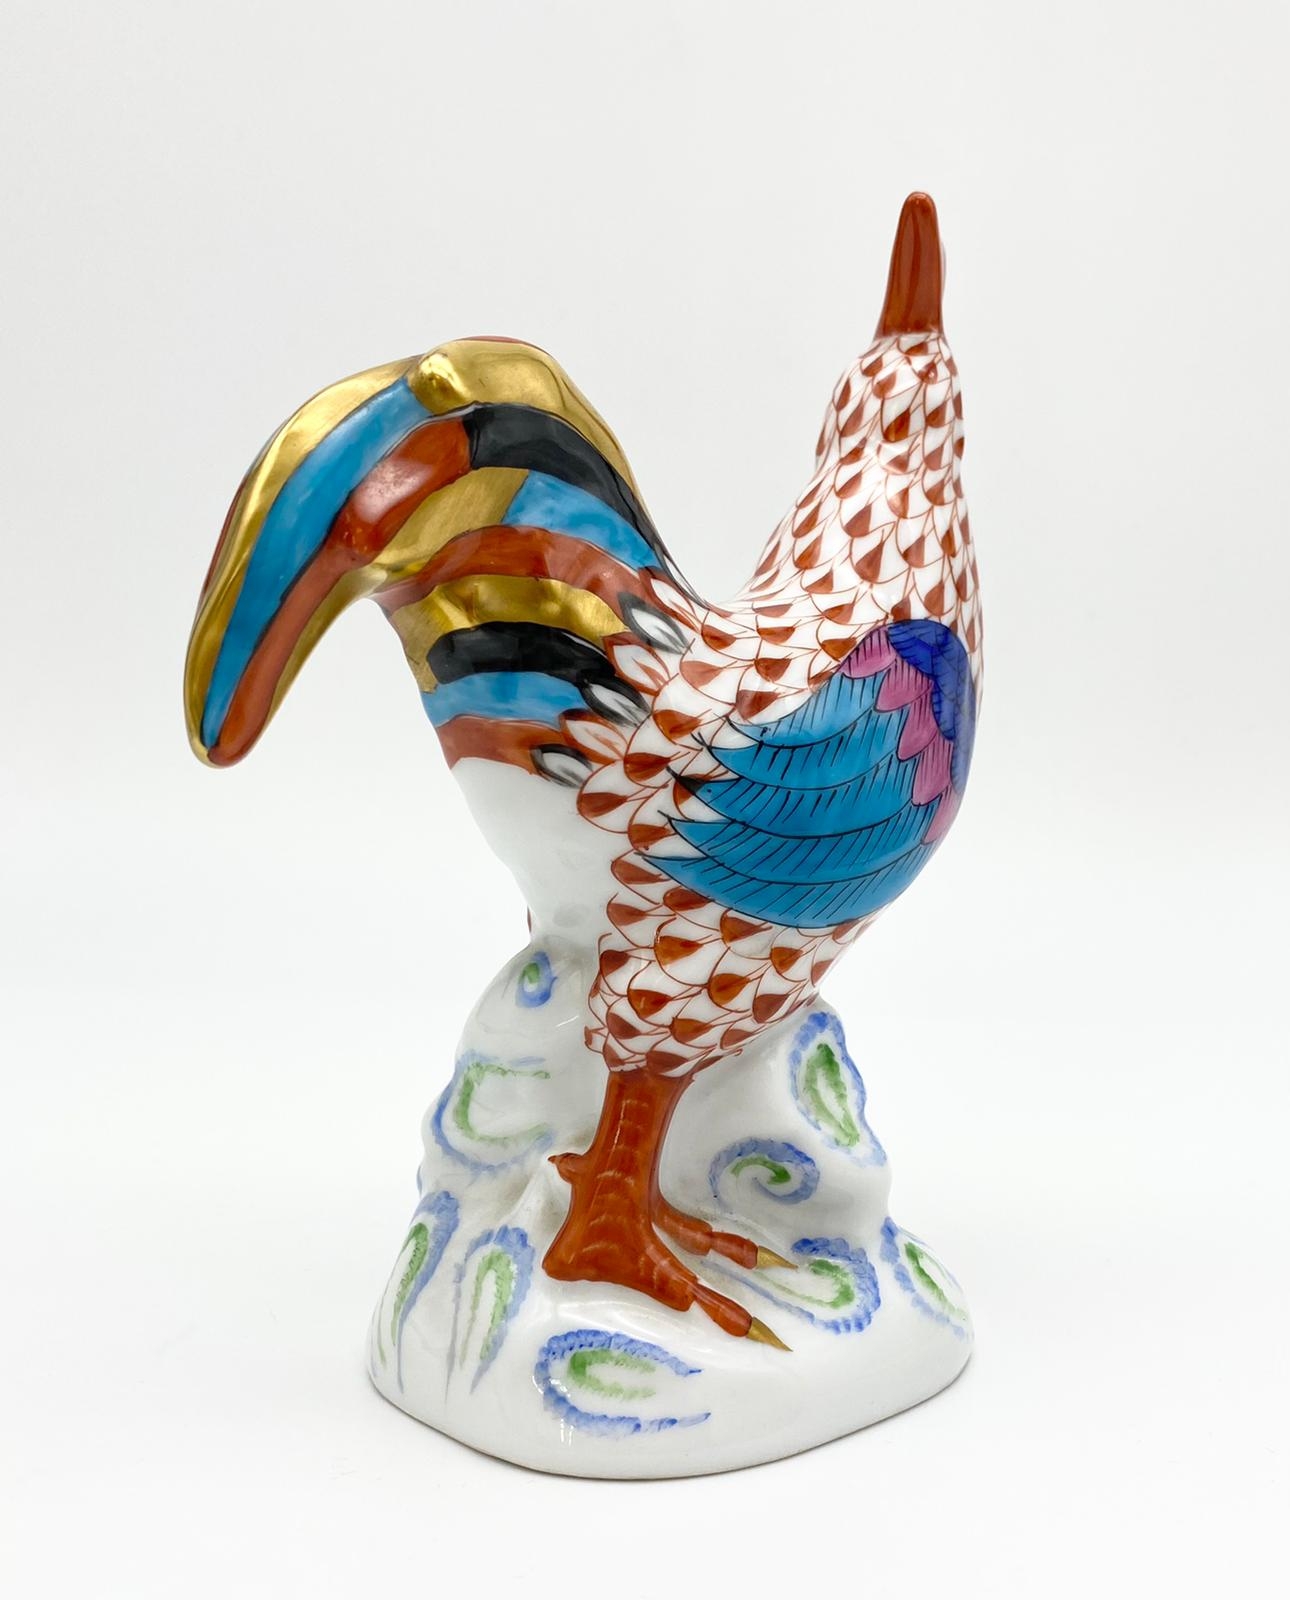 Herend Porcelain Rooster Figurine. Beautifully Hand-painted. Very Good Condition. 15cm tall. - Image 2 of 3